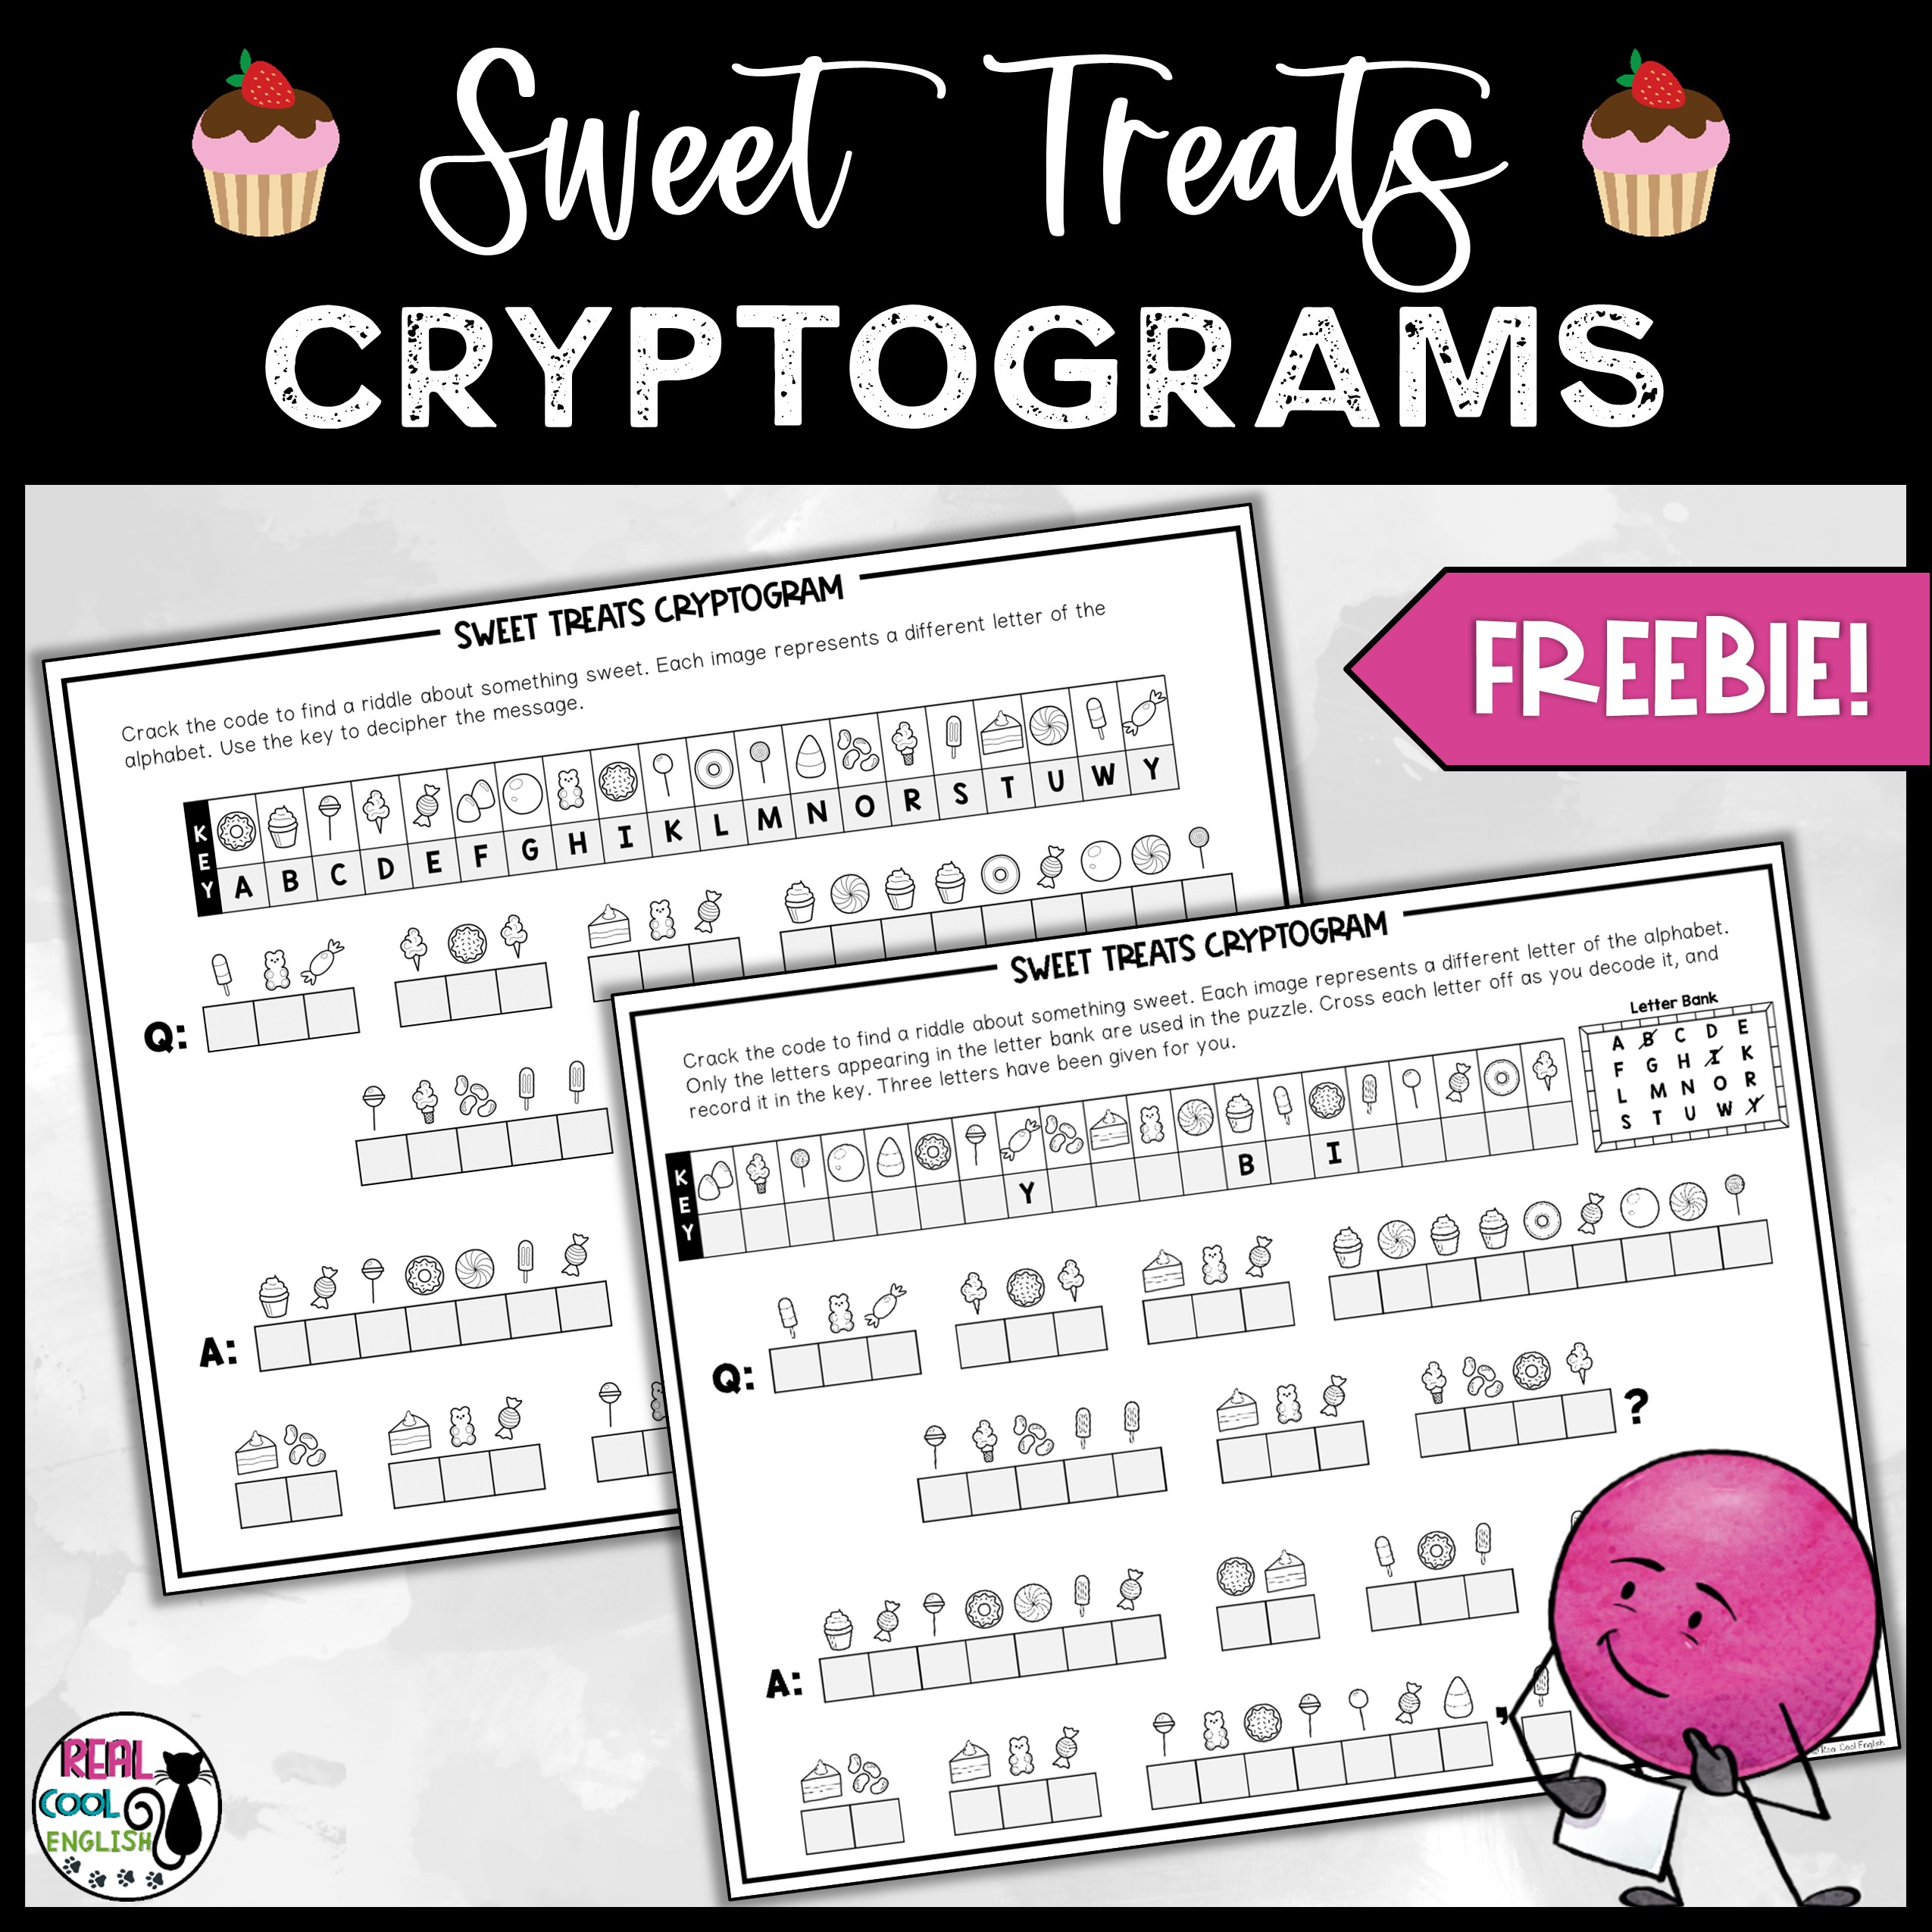 Two cryptogram puzzles with riddles about sweet treats